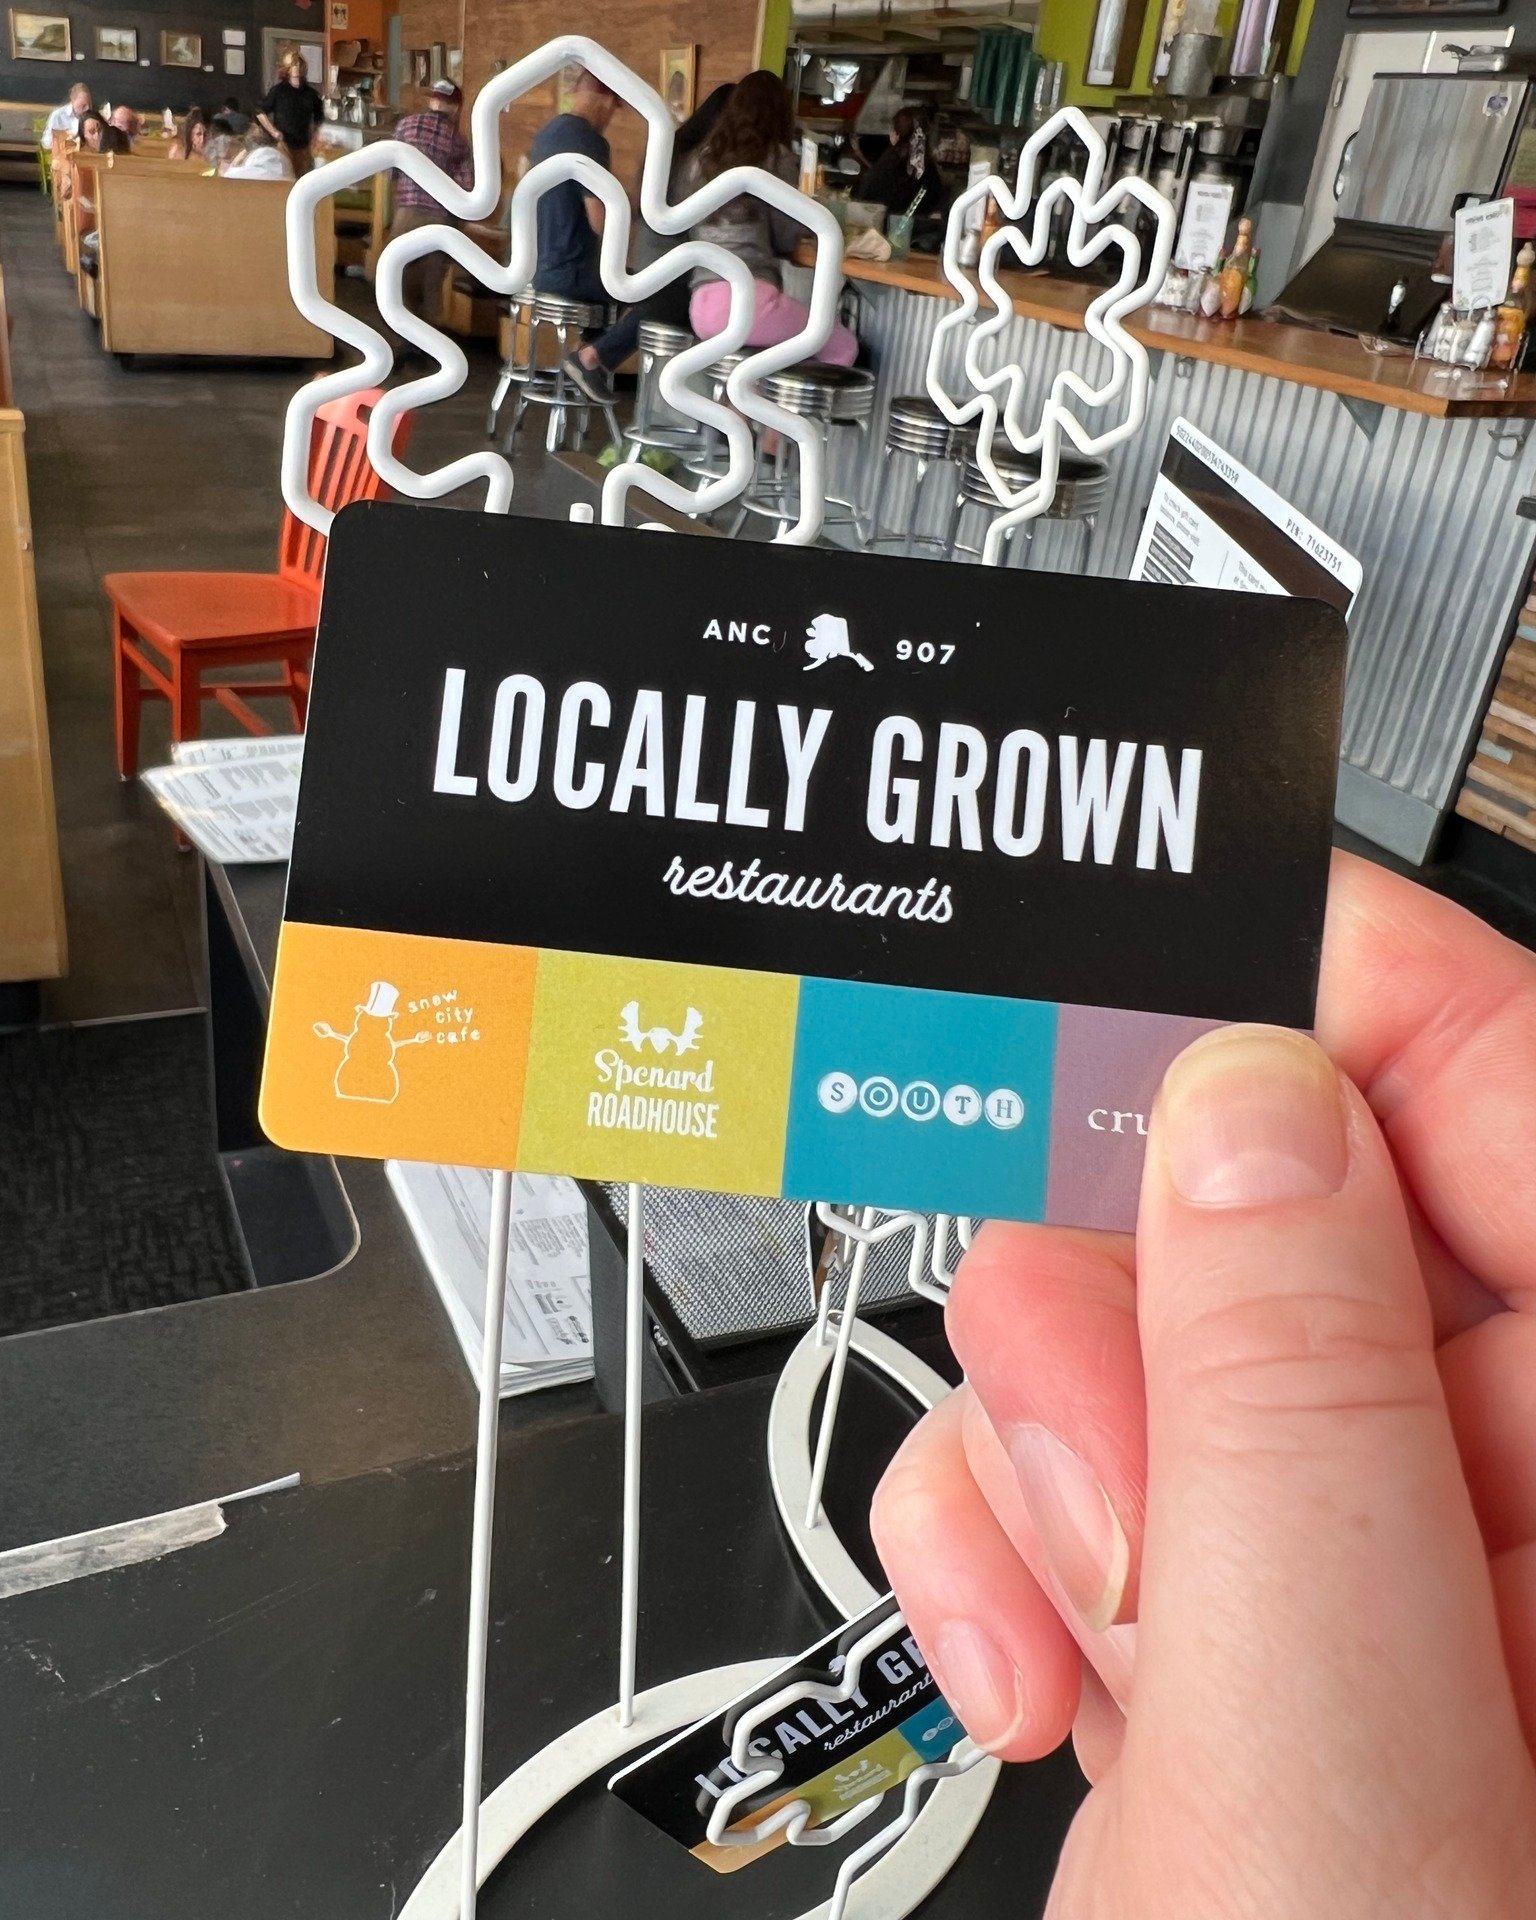 Your kids' teachers have worked so hard this year!  Say &quot;thank you&quot; with a gift card from Locally Grown Restaurants. 
They can be used at Snow City Cafe, Spenard Roadhouse, South Restaurant + Coffeehouse and Crush Bistro!